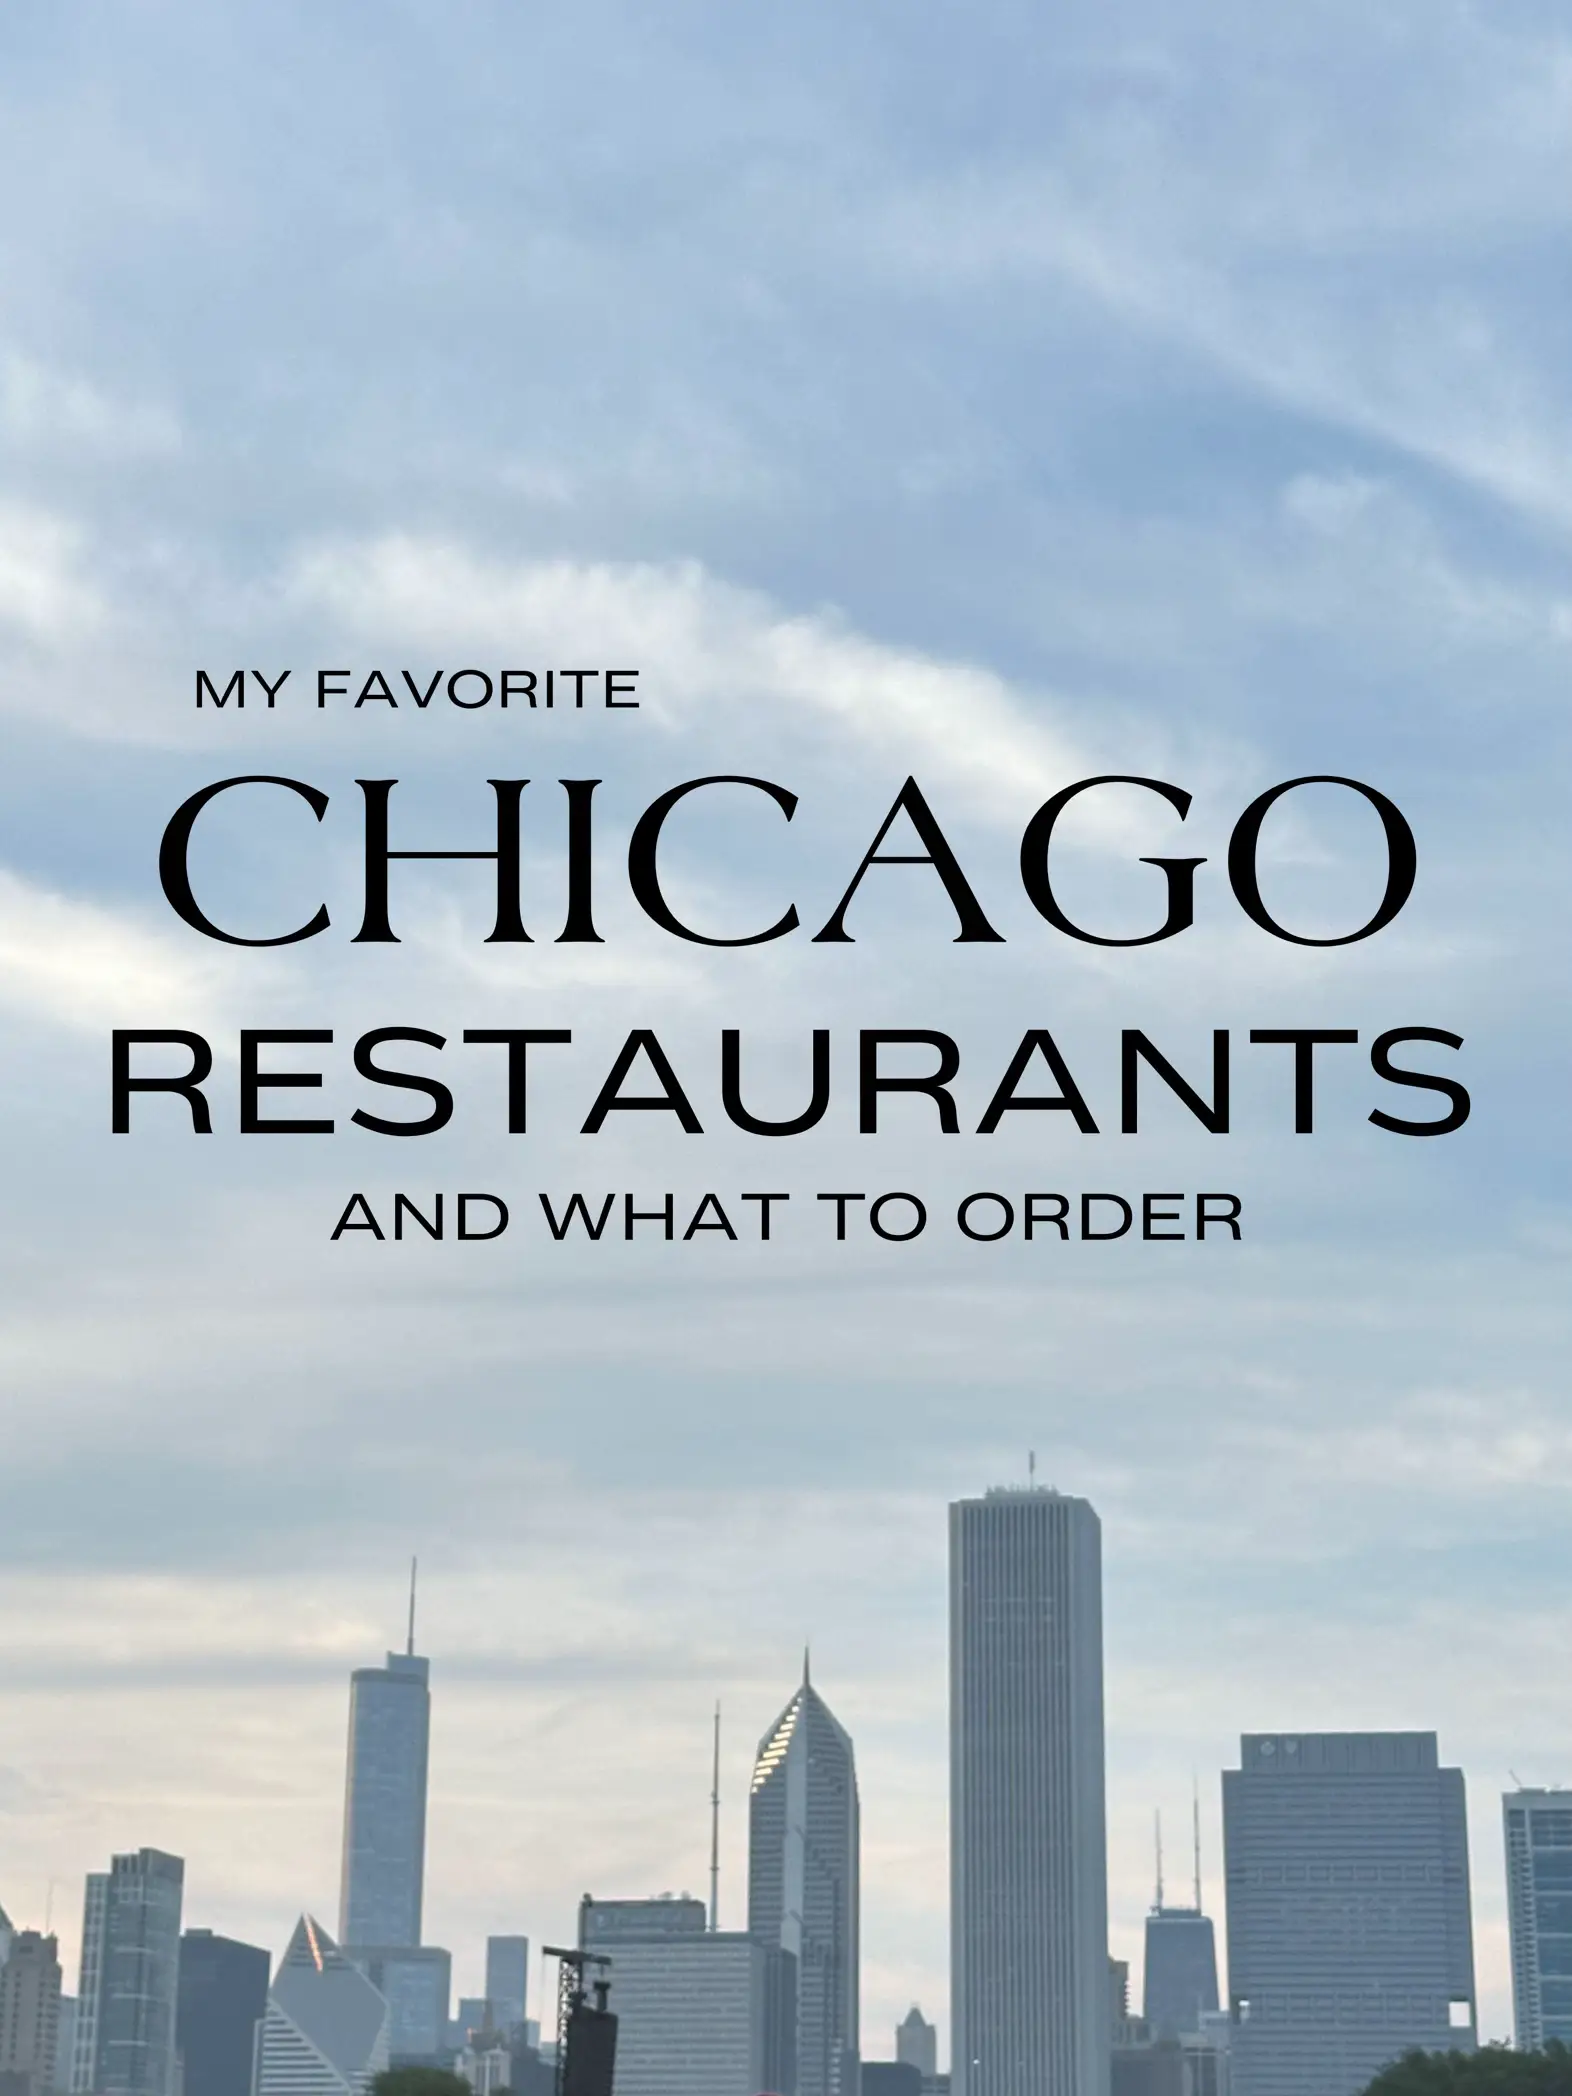  A cityscape of Chicago with a restaurant list.